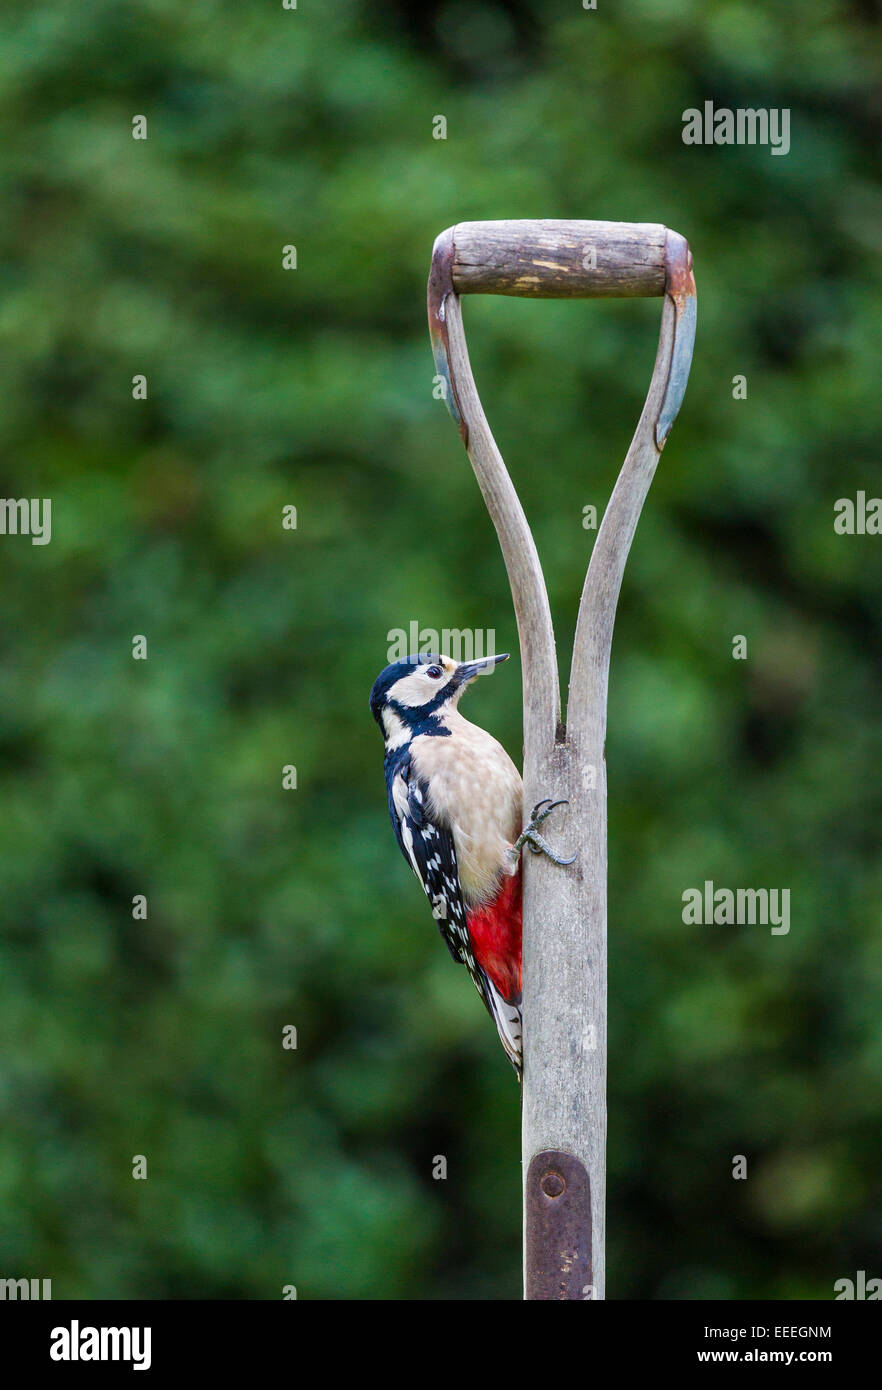 Greater Spotted Woodpecker climbing a garden fork Stock Photo